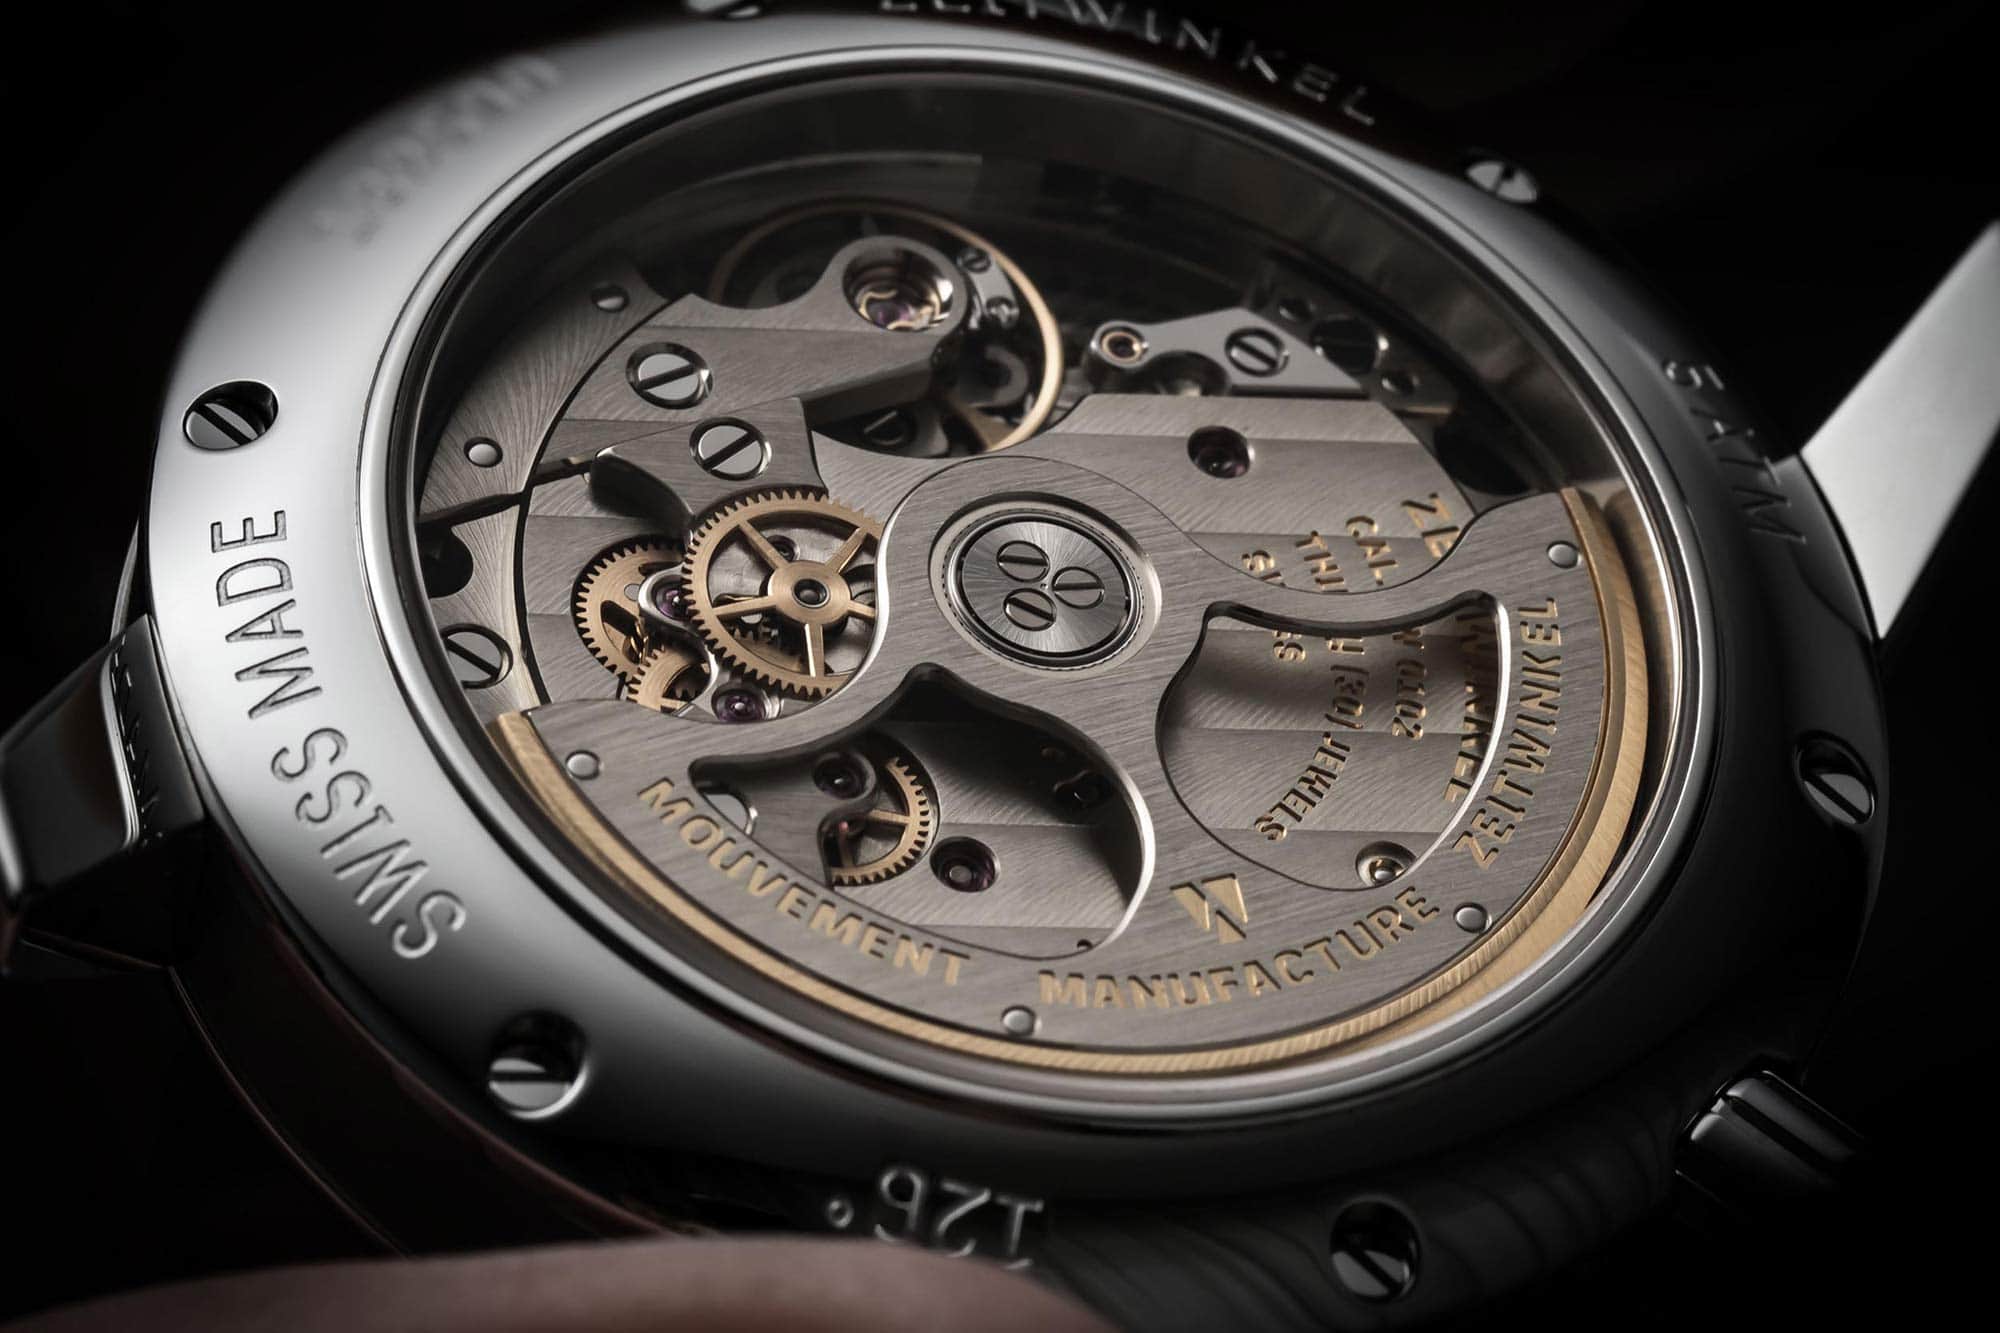 Who's Who of Watchmaking: LVMH & Kering Group — Latest Watchmaking News -  WATCHESTV